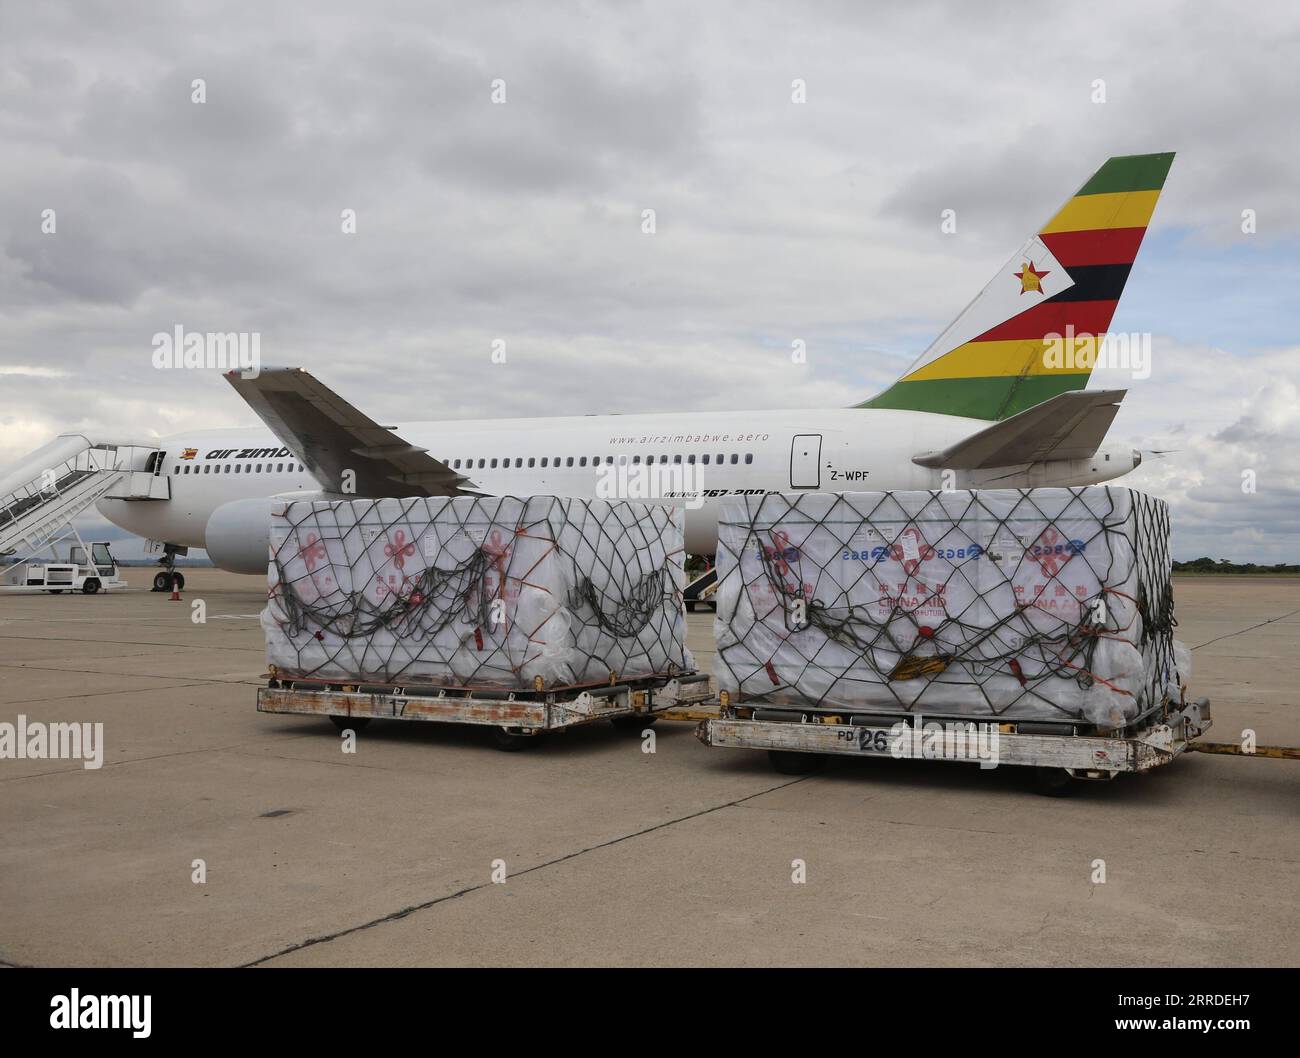 211220 -- HARARE, Dec. 20, 2021 -- A batch of COVID-19 vaccine donated by China arrives at Robert Gabriel Mugabe International Airport in Harare, Zimbabwe, on Dec. 20, 2021. Zimbabwe on Monday received a batch of Sinovac COVID-19 vaccine donated by China, which will boost the country s vaccination campaign as it battles the fourth wave of COVID-19 pandemic.  ZIMBABWE-HARARE-CHINA-COVID-19 VACCINE-MEDICAL SUPPLIES-DONATION ZhangxYuliang PUBLICATIONxNOTxINxCHN Stock Photo